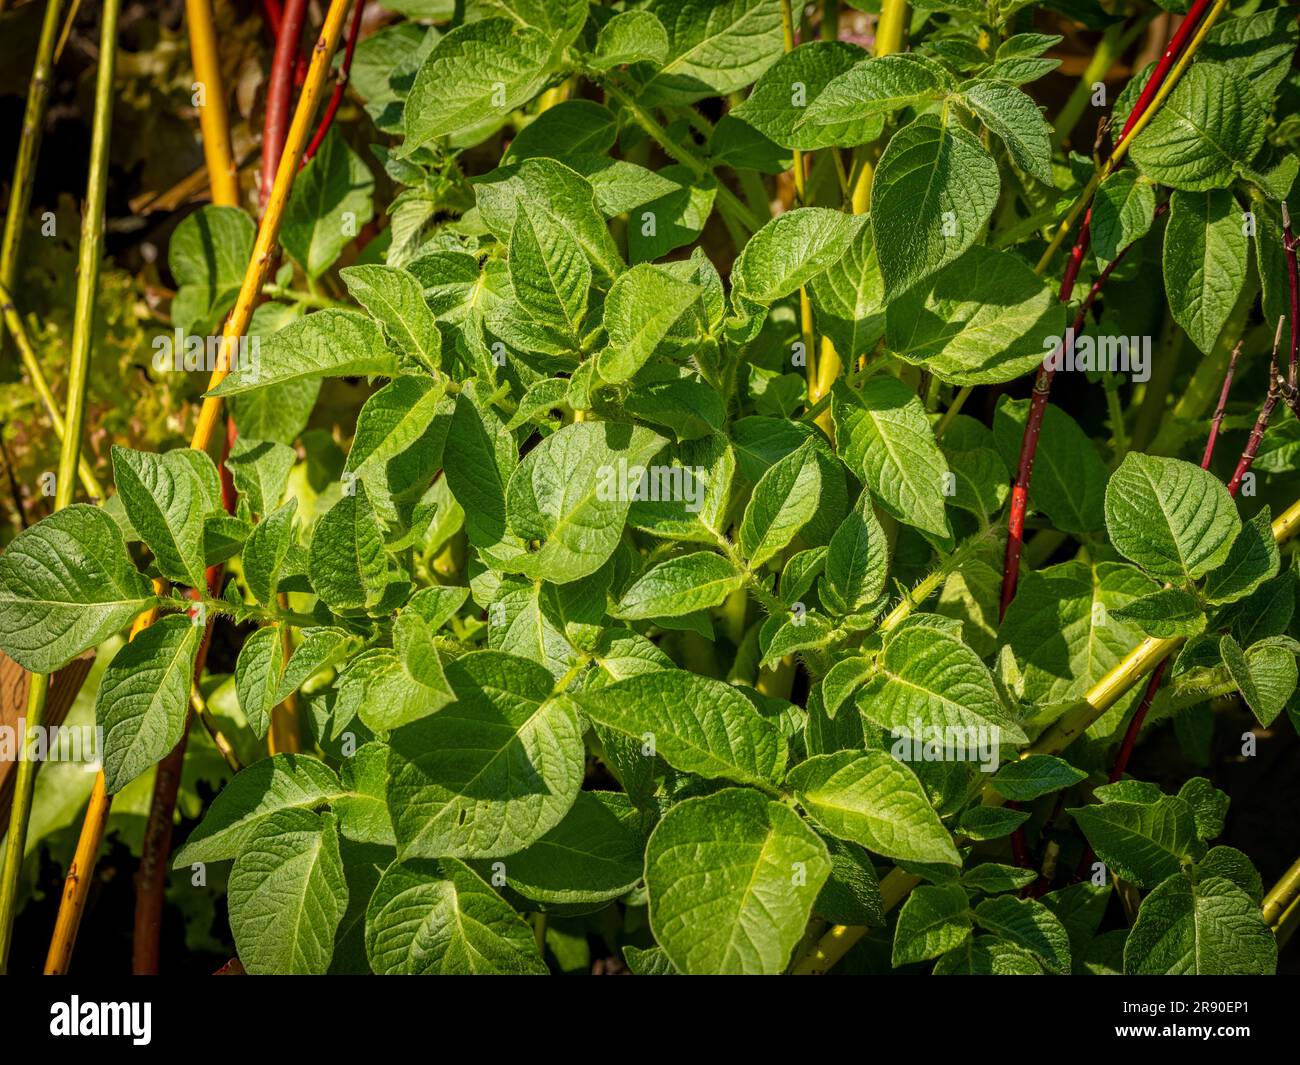 Lush green leaves of second early potato 'Kestrel' growing in a UK garden. Stock Photo